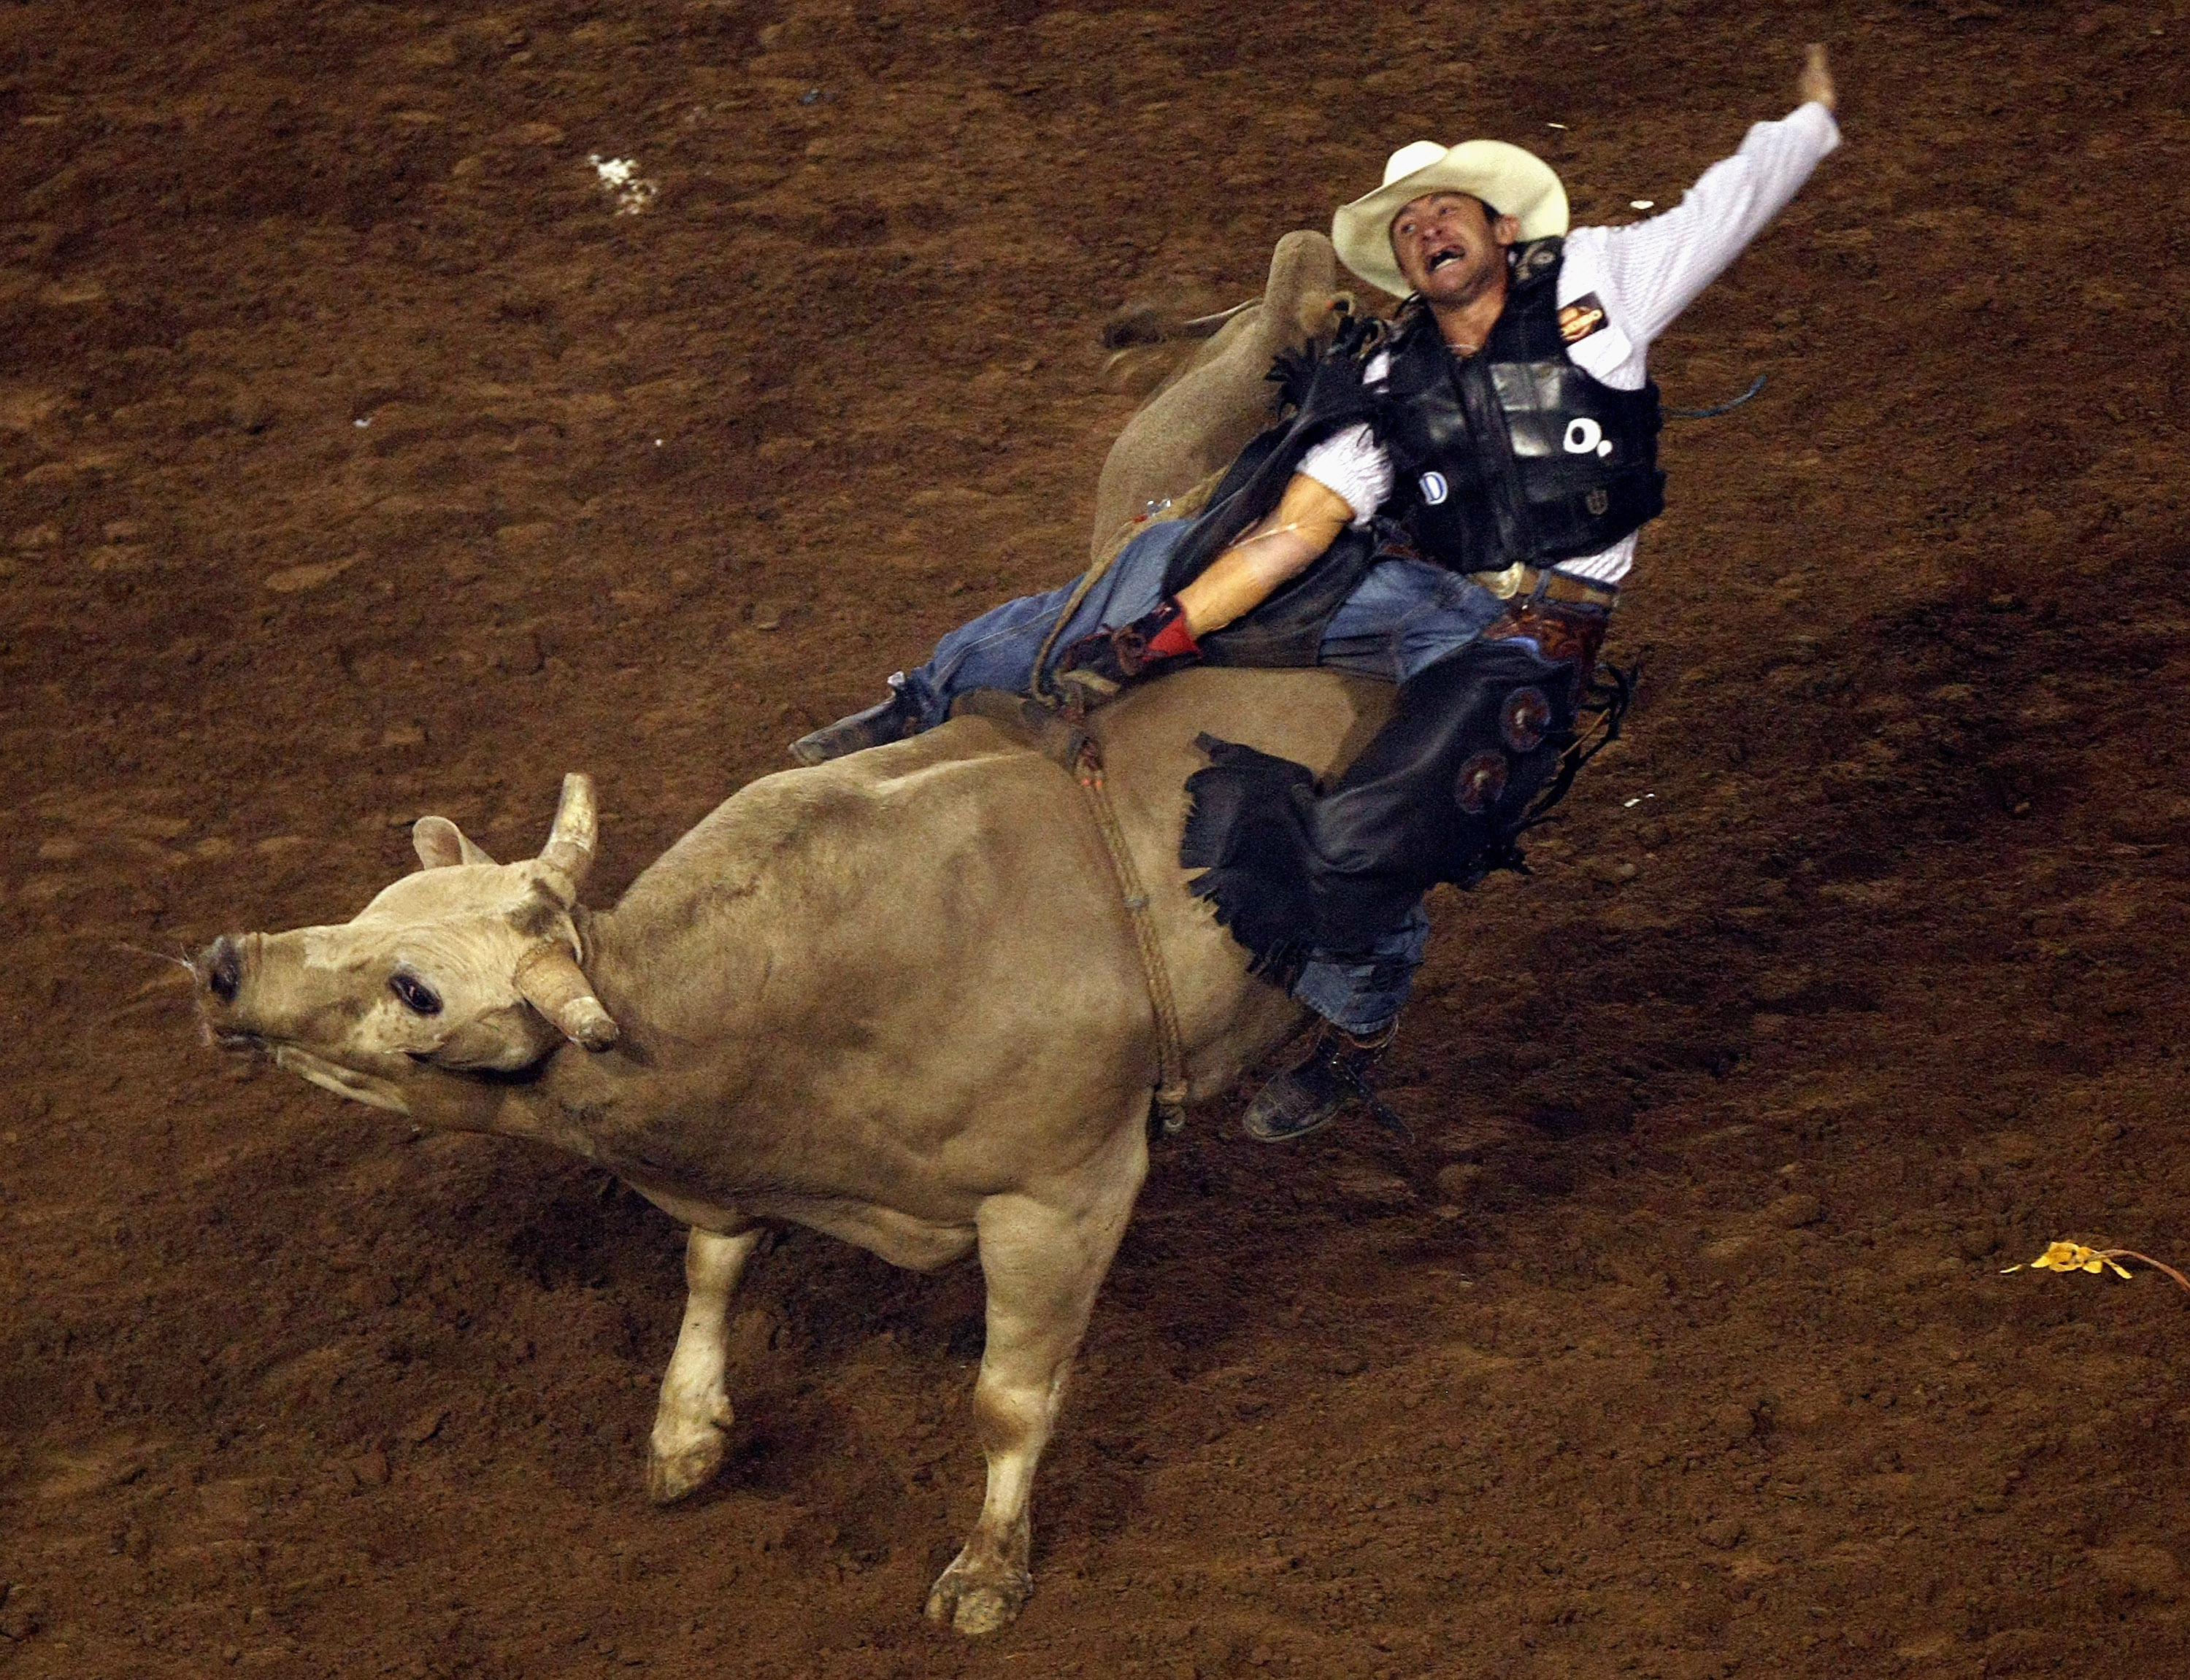 The History of Bull-Riding-“Who's Bright Idea Was This?!”